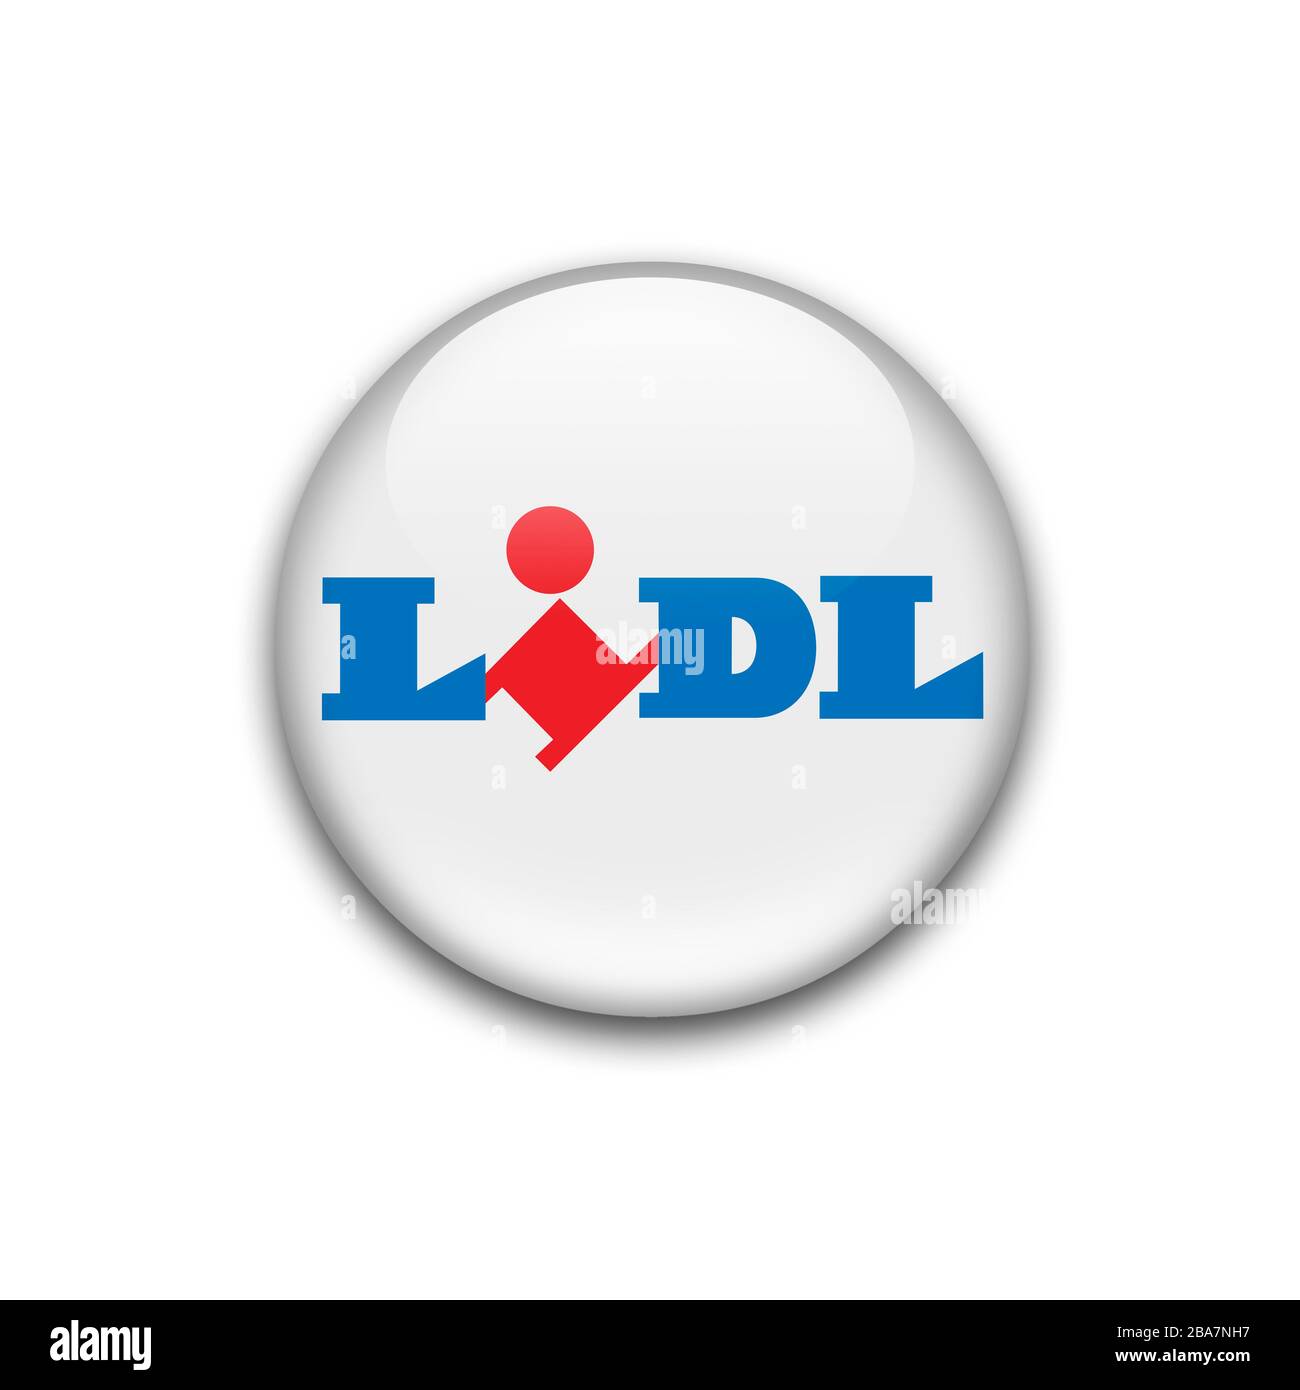 Lidl logo icon Cut Out Stock Images & Pictures - Alamy